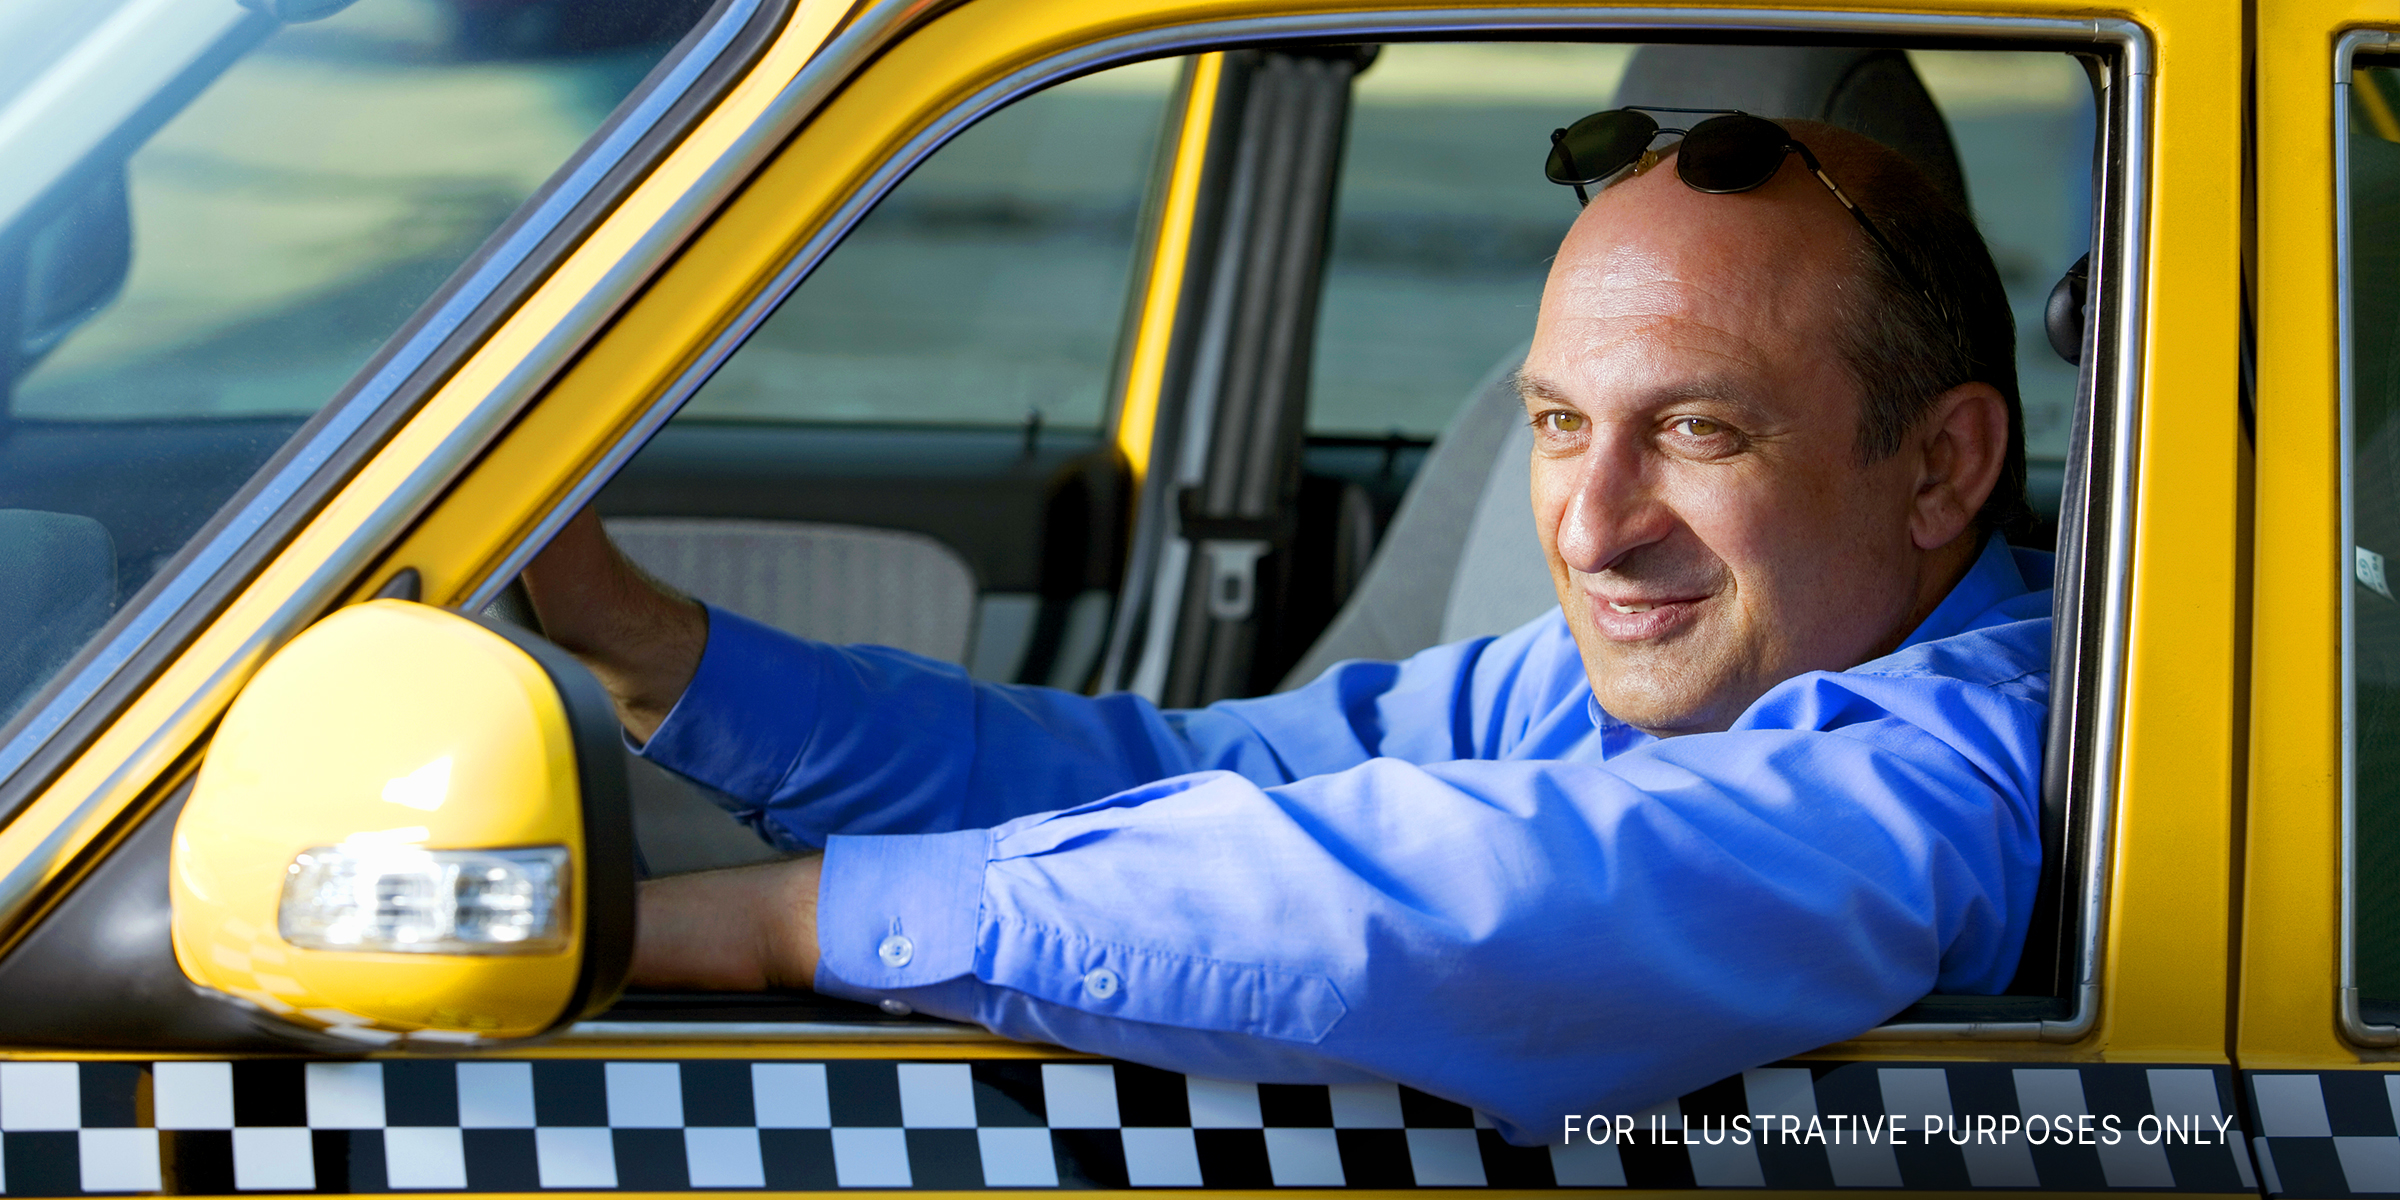 Male taxi driver in yellow taxi | Source: Shutterstock